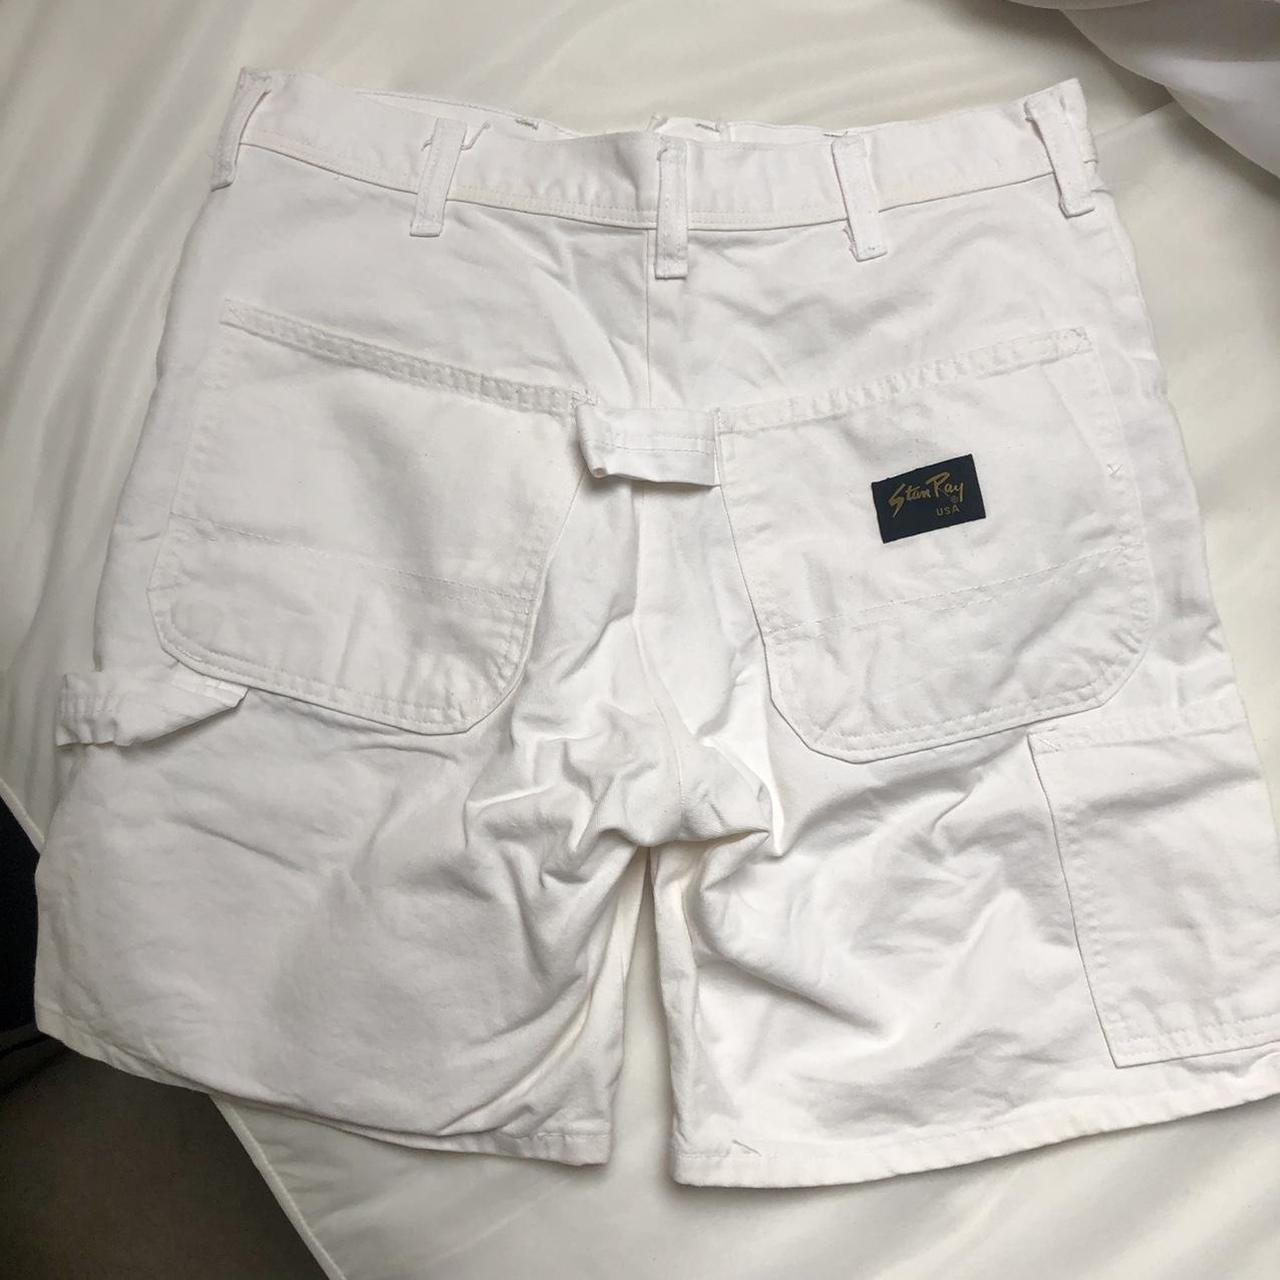 Product Image 4 - Vintage Stan Ray White Shorts

29”